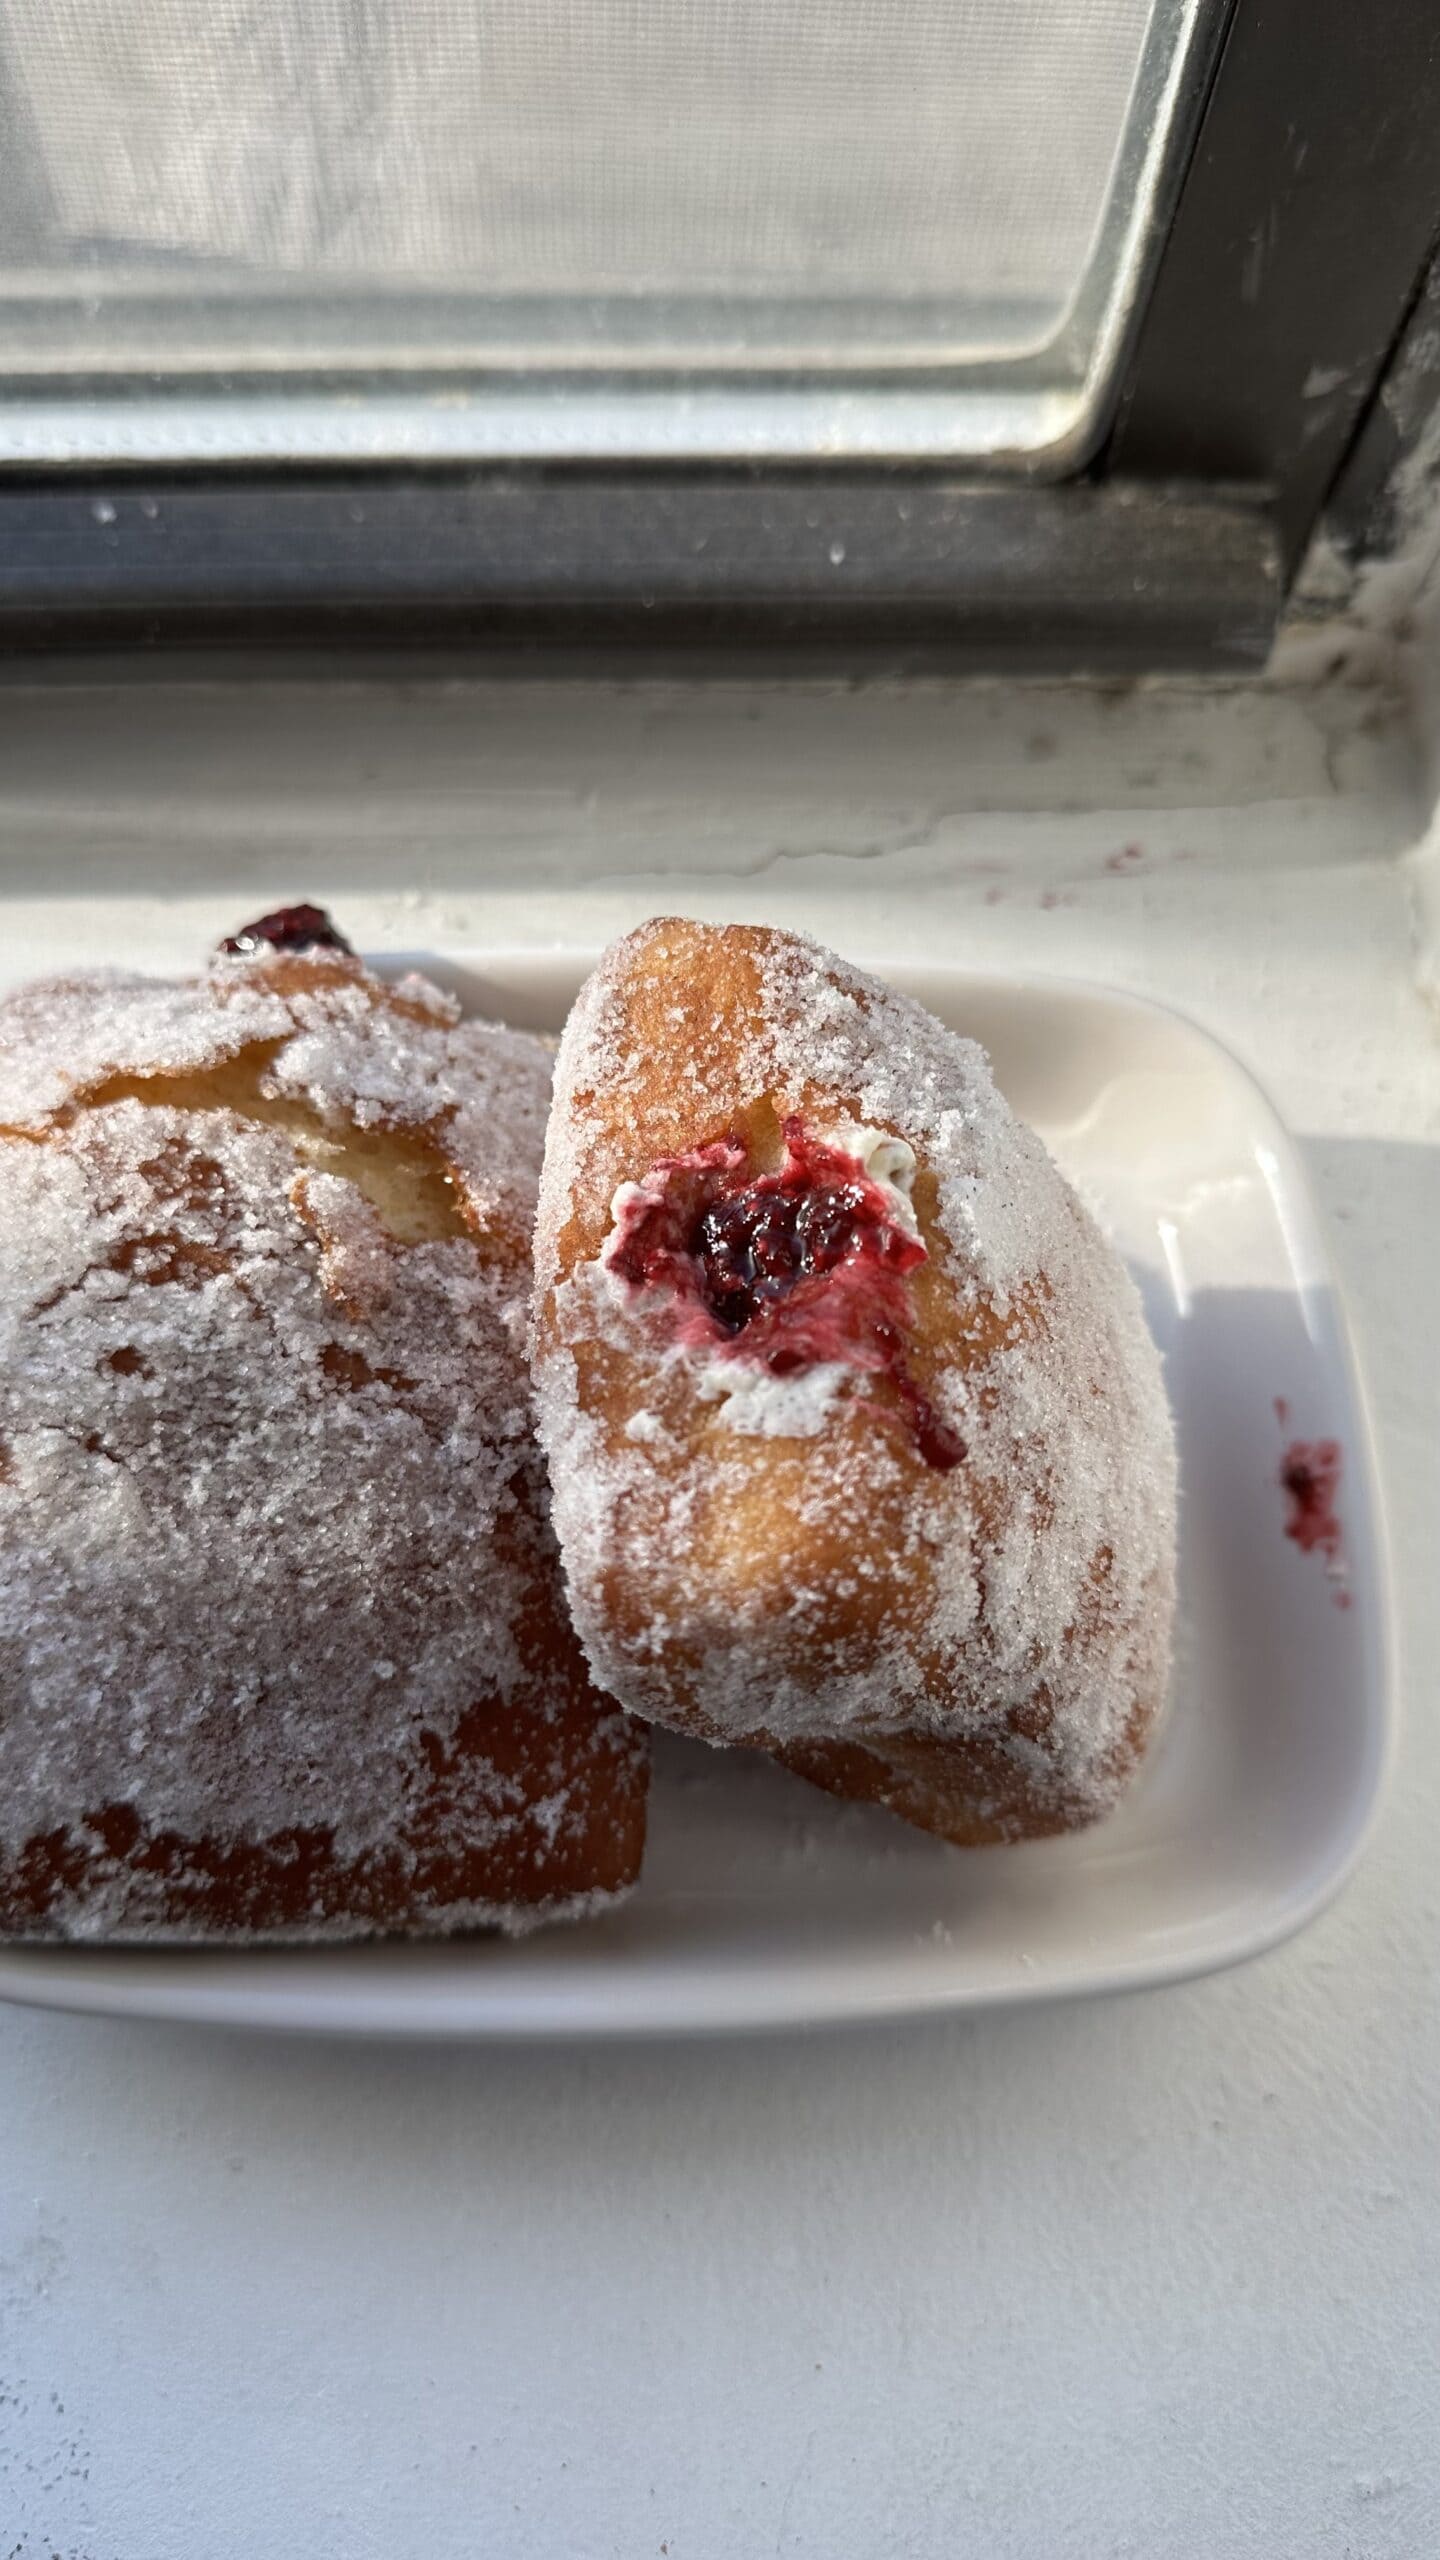 Two sugar rolled, cream and jam filled doughnuts on a white plate.